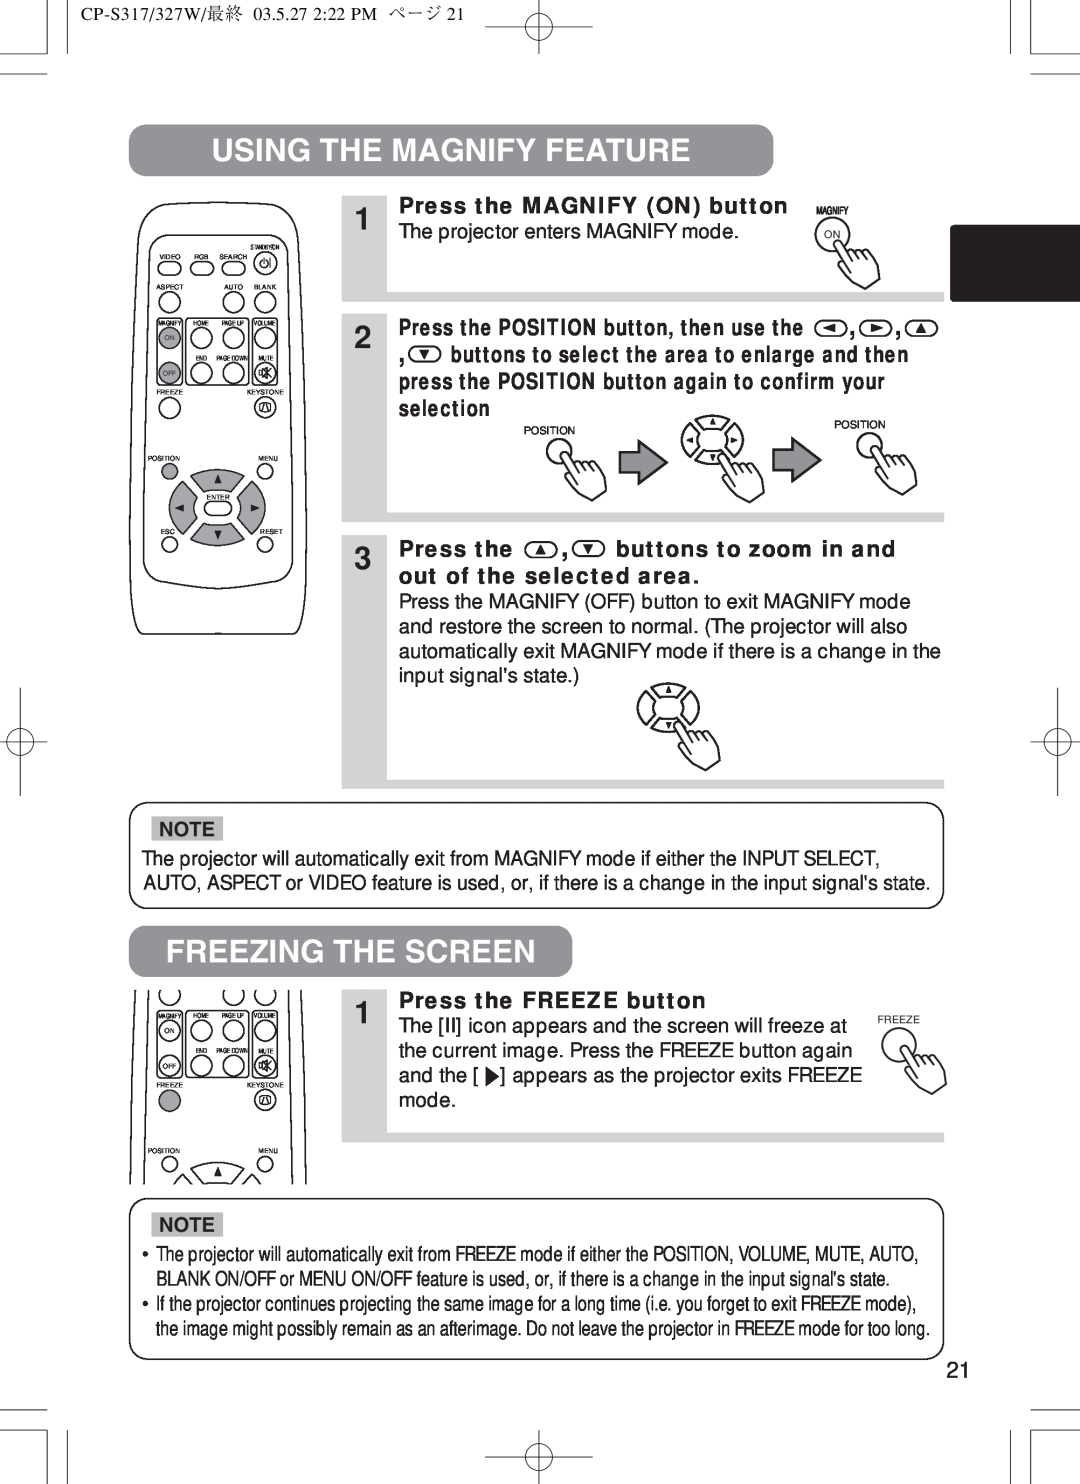 BOXLIGHT CP-322I user manual Using The Magnify Feature, Freezing The Screen, Press the MAGNIFY ON button, selection 